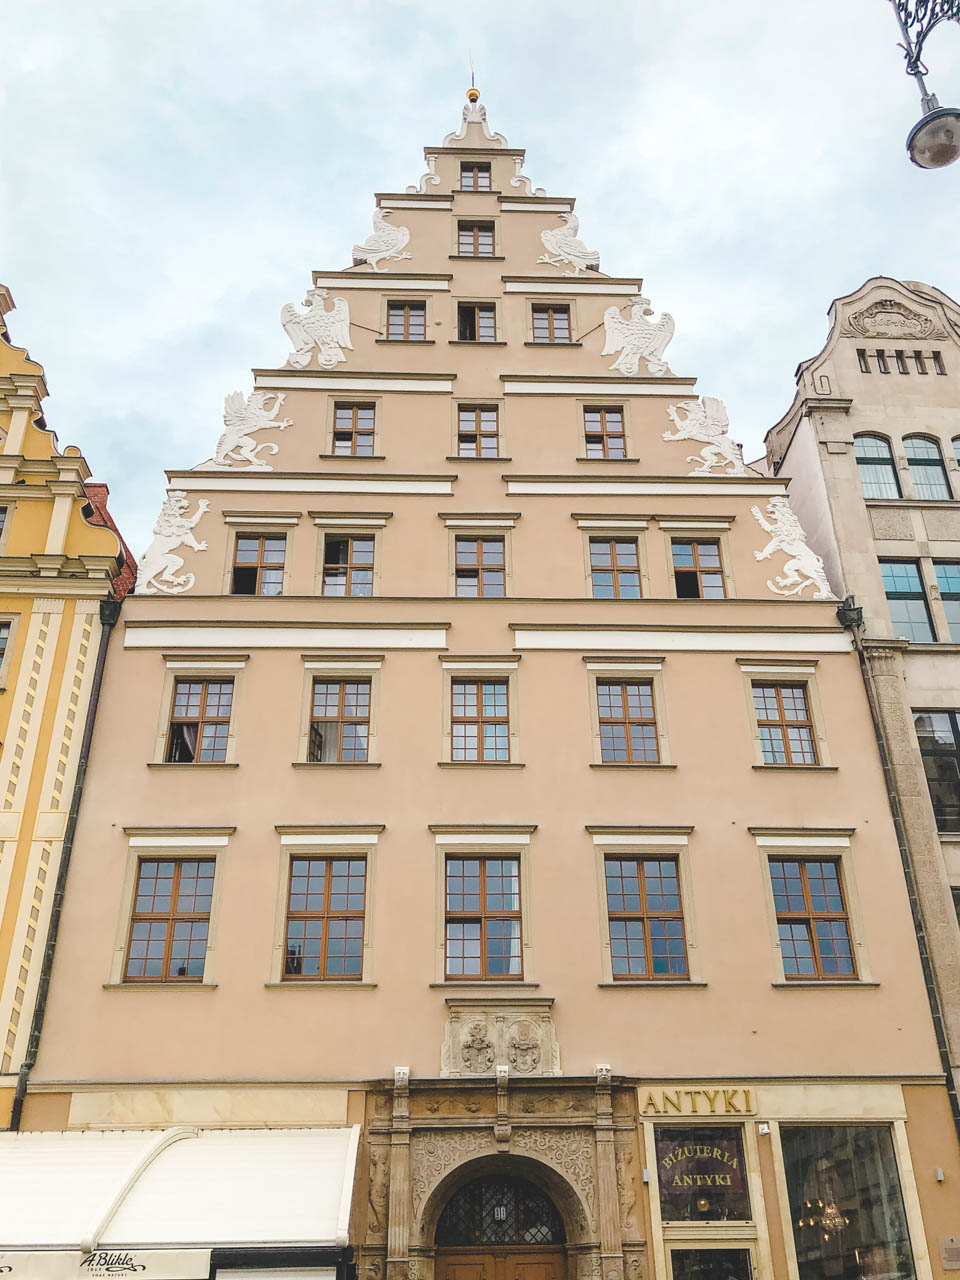 The tenement house Under the Griffins in Wrocław's Old Town seen from below